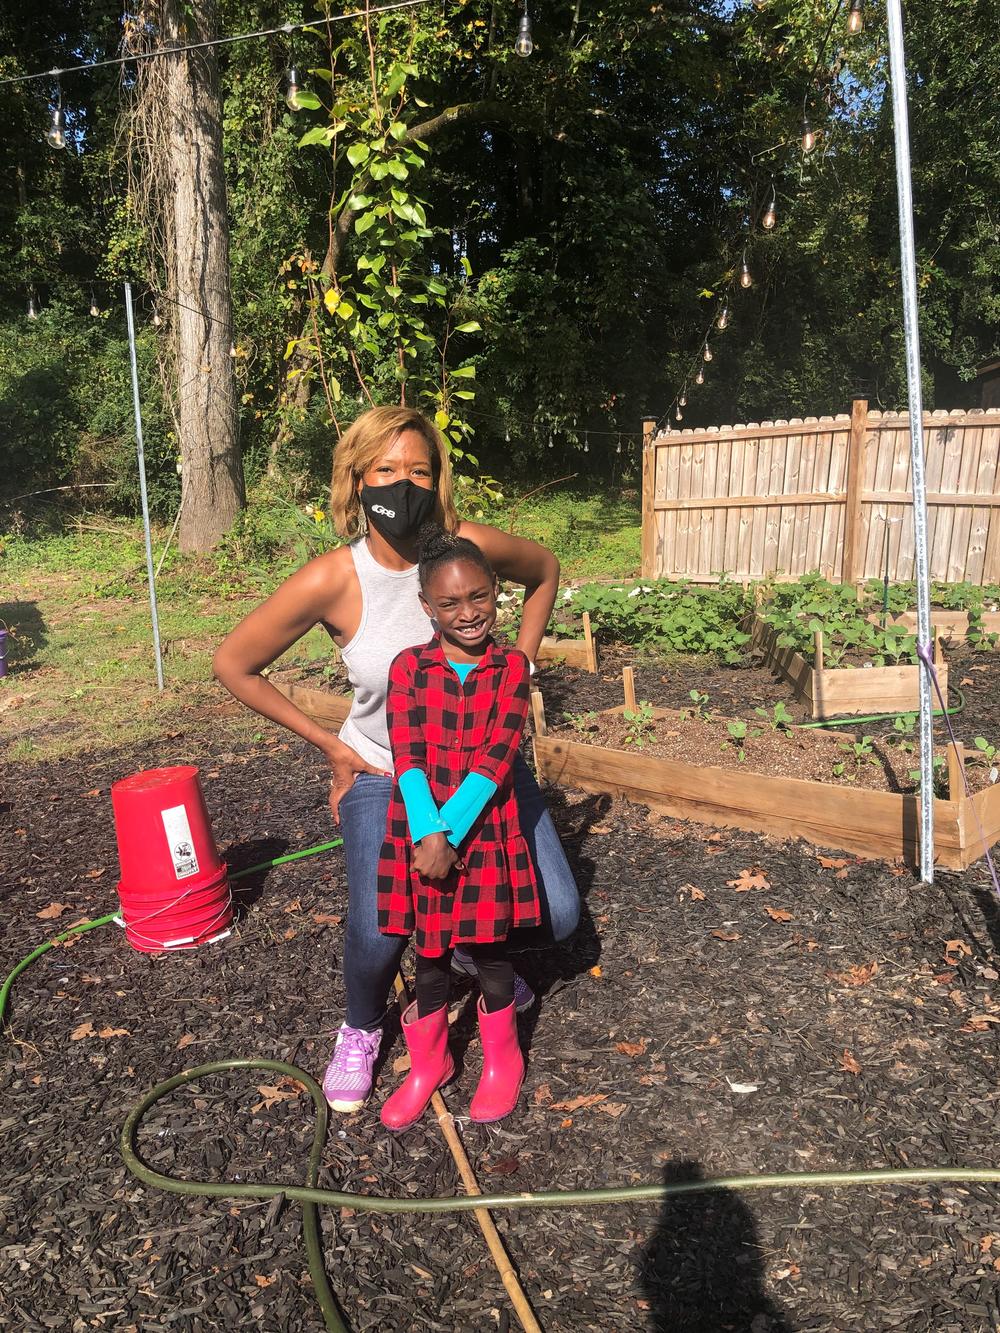 Morning Edition host Leah Fleming poses with Kendall Johnson, the youngest USDA-certified farmer in Georgia, at the 6-year-old's growing farm in Southwest Atlanta in autumn 2021.